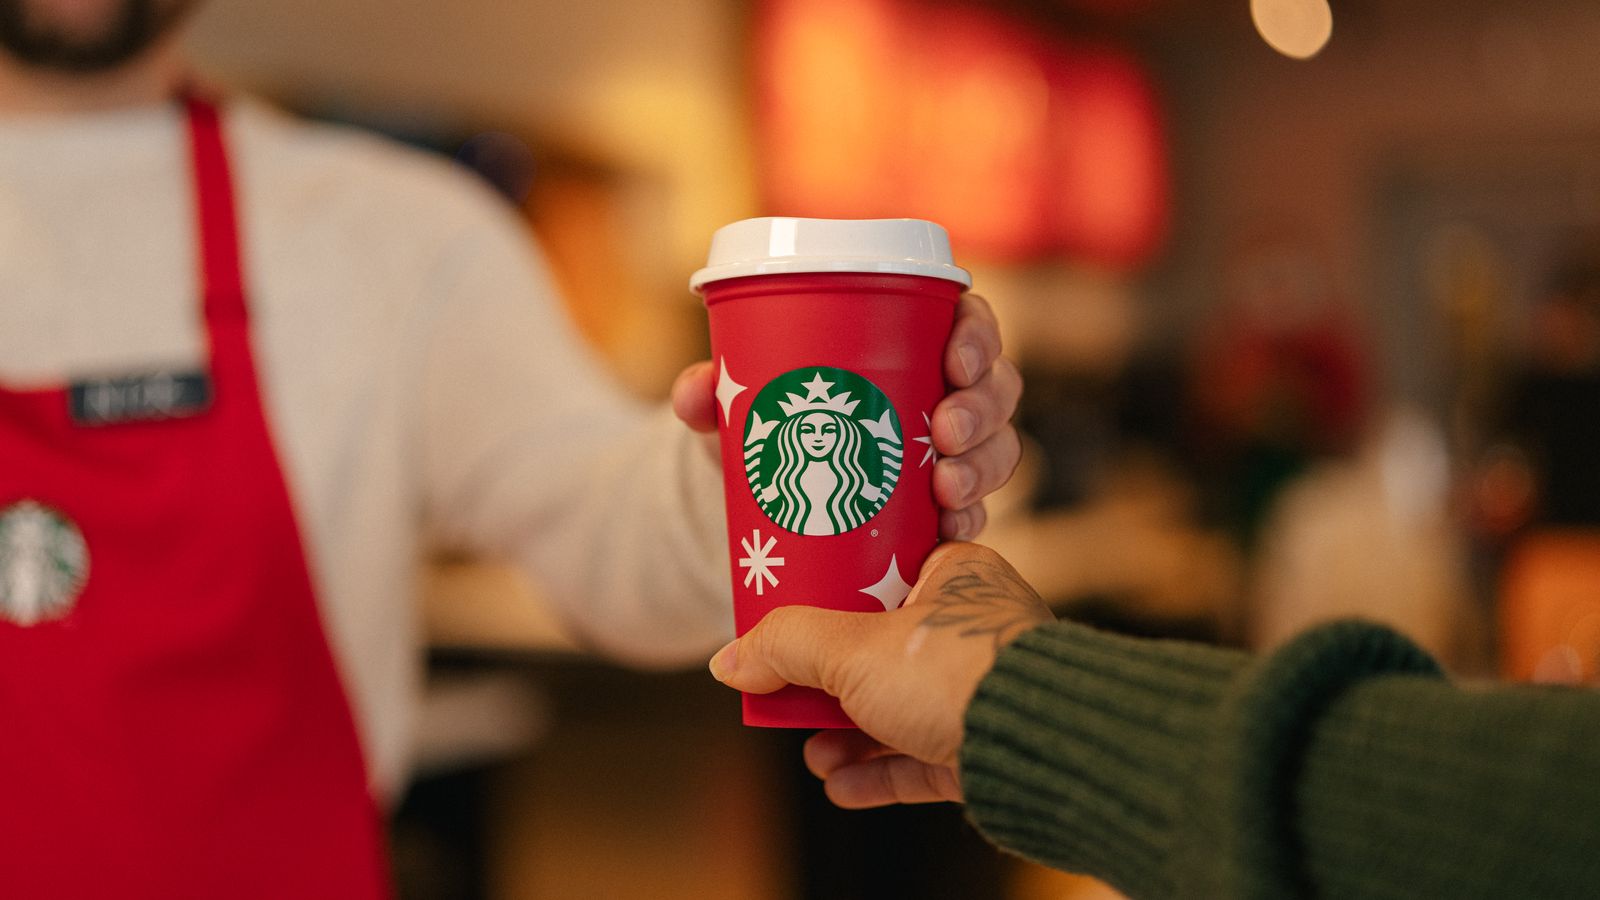 Starbucks' Holiday Cups and Drinks Return Friday, November 6